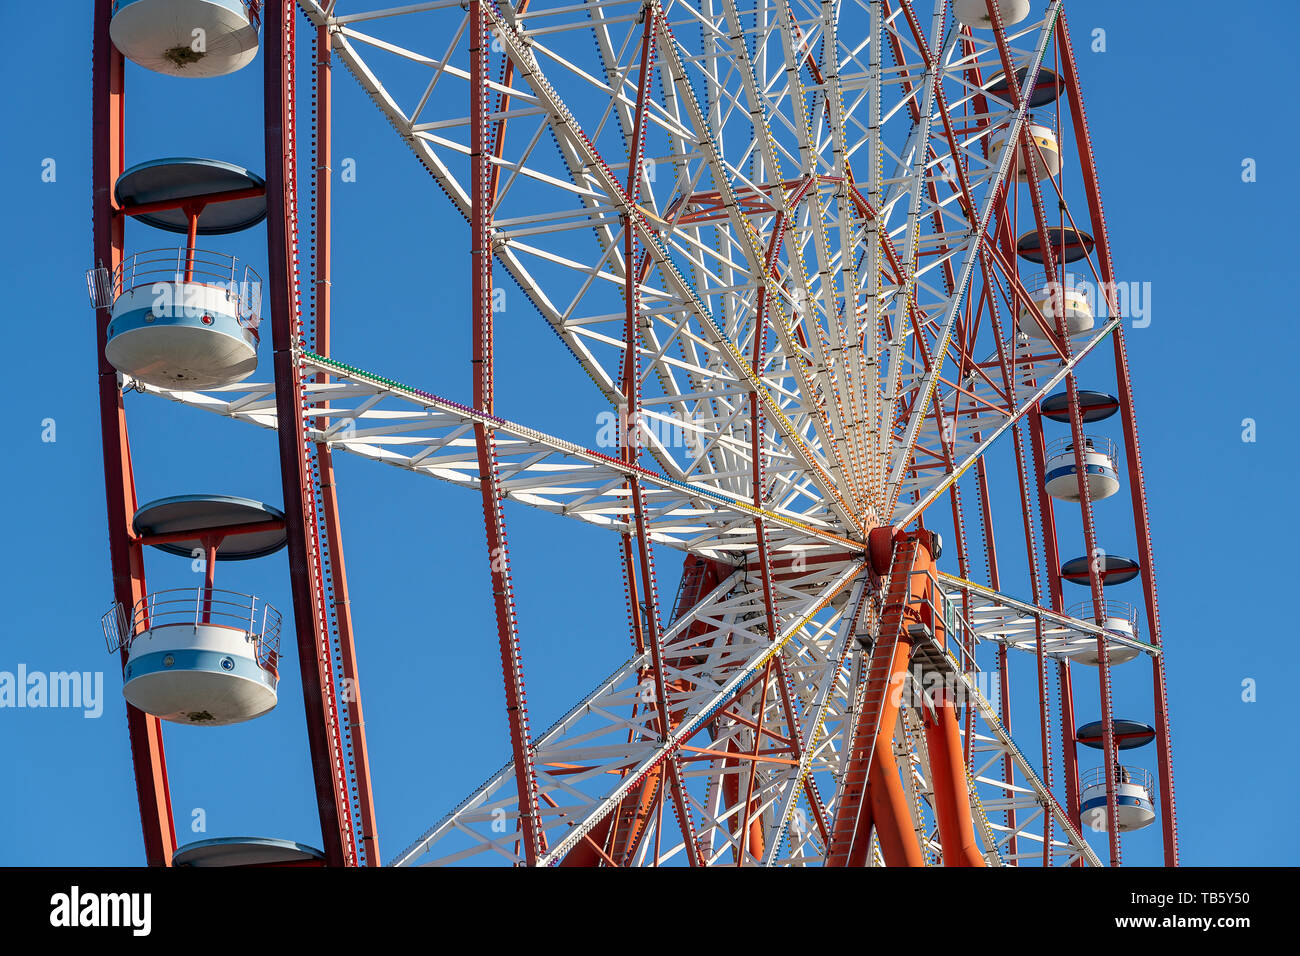 Detail of a ferris wheel over blue sky background Stock Photo